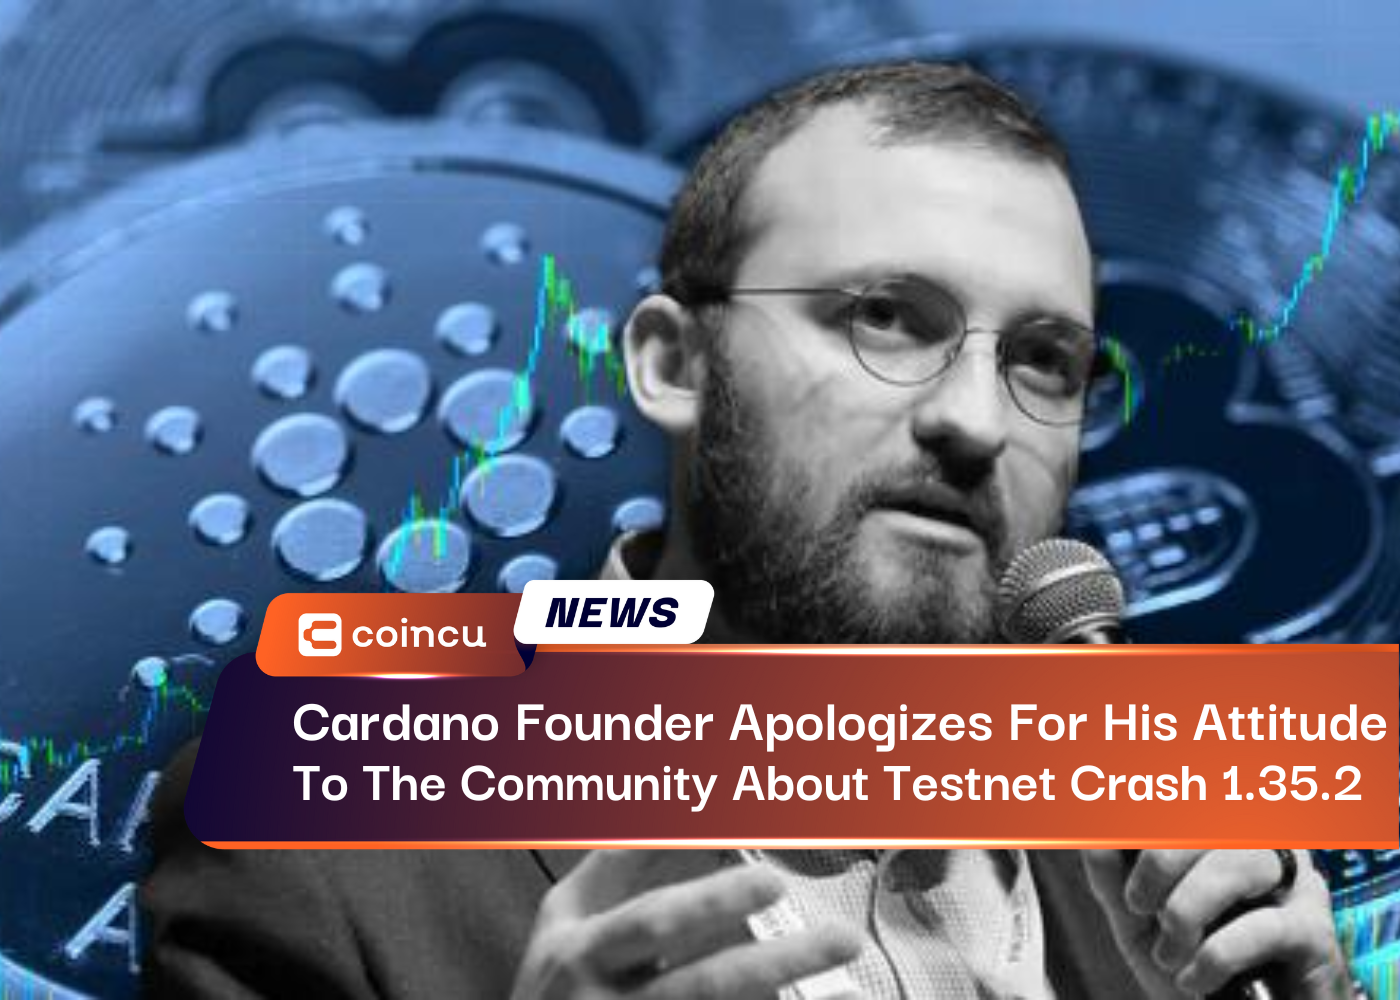 Cardano Founder Apologizes For His Attitude To The Community About Testnet Crash 1.35.2